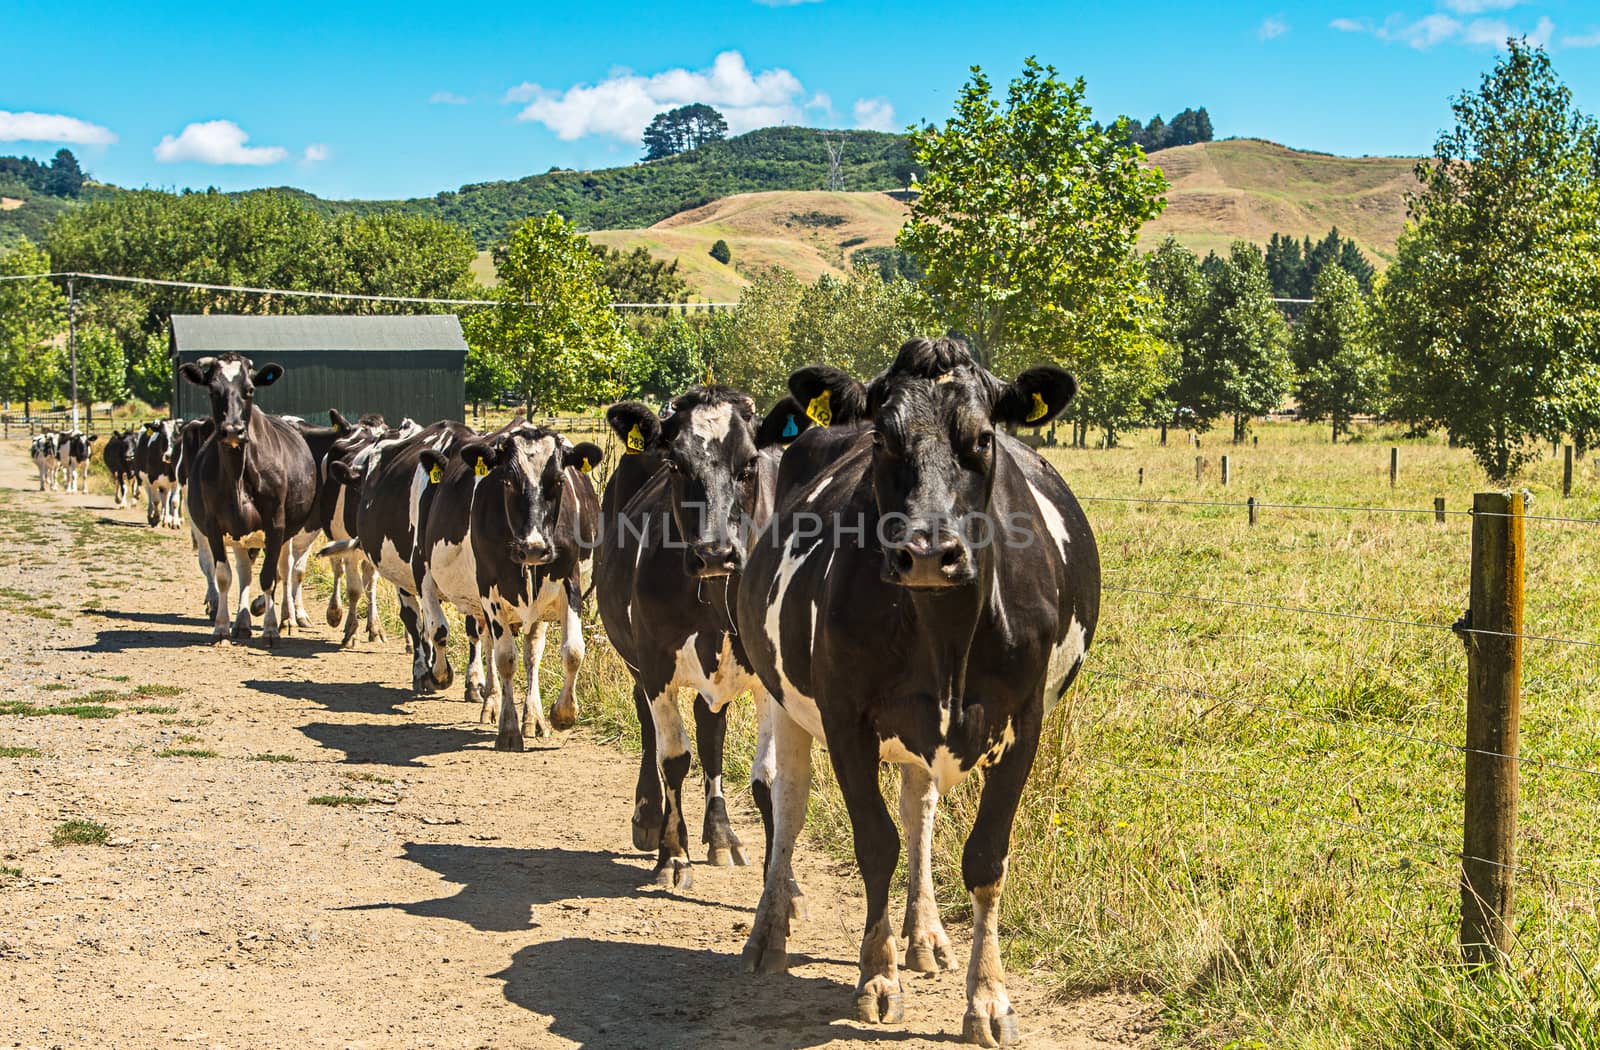 Cows going home